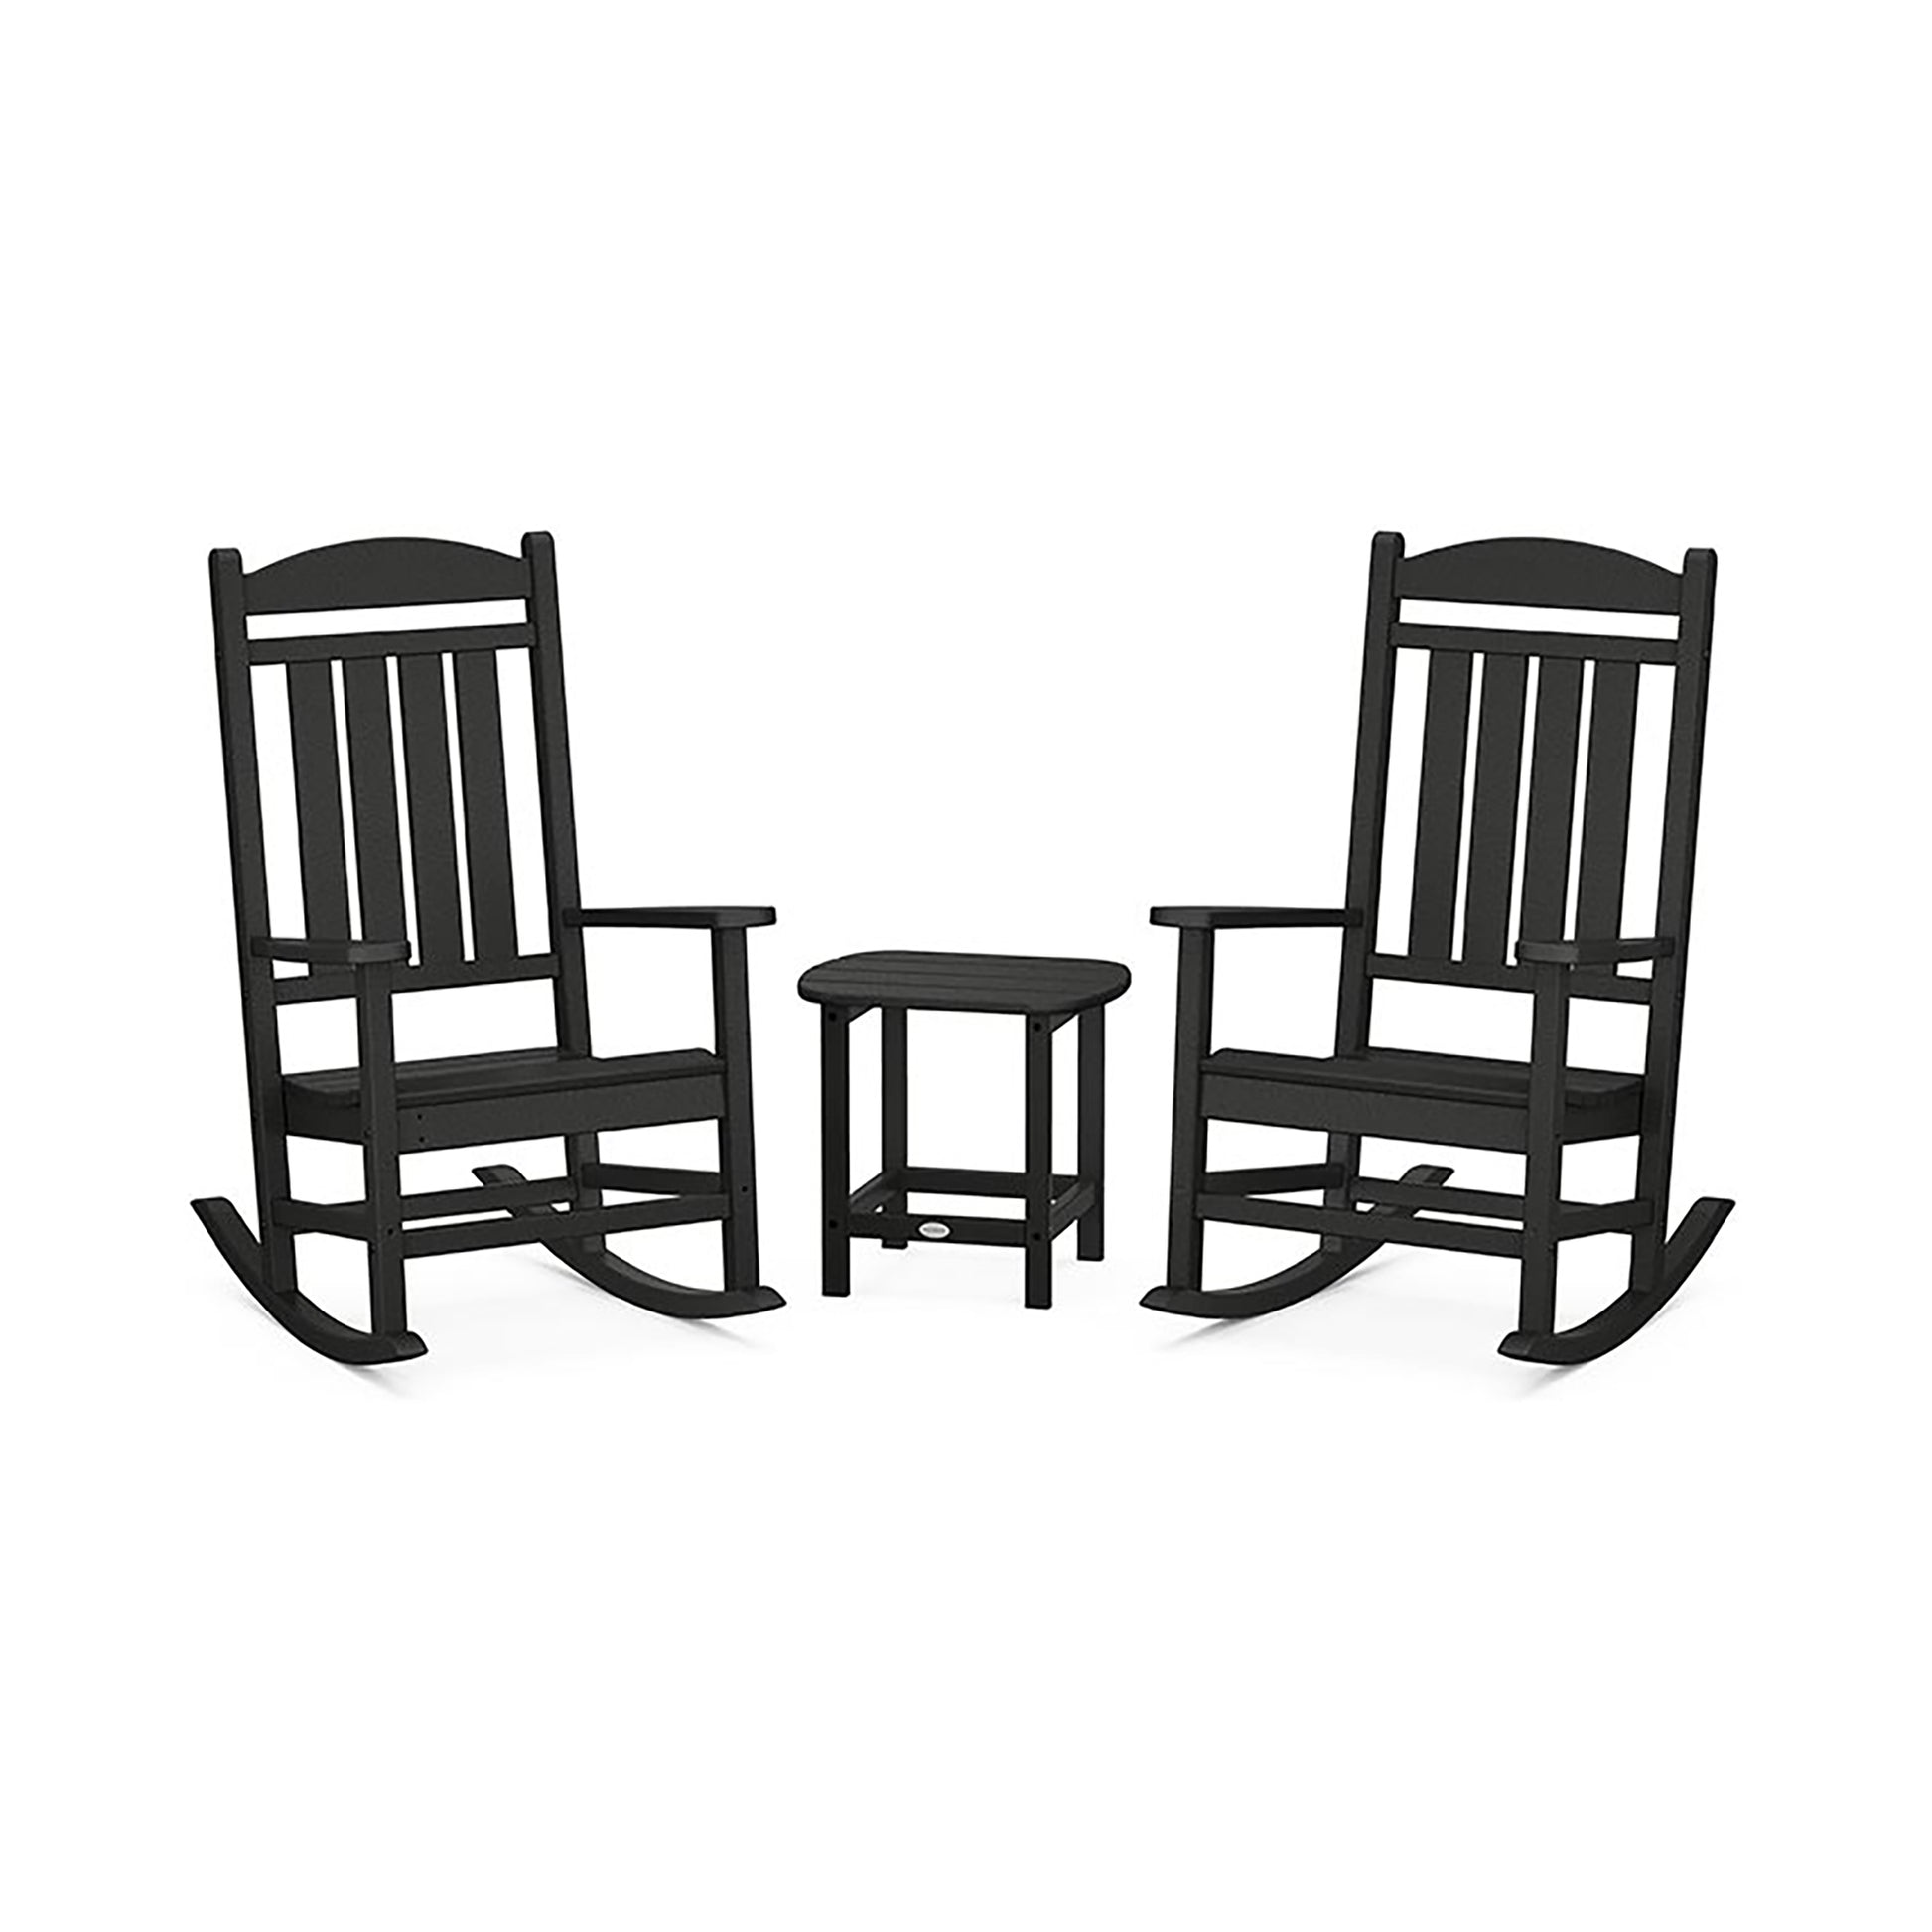 Two black POLYWOOD Presidential Outdoor Rocking Chairs facing each other with a small matching stool placed between them on a white background.